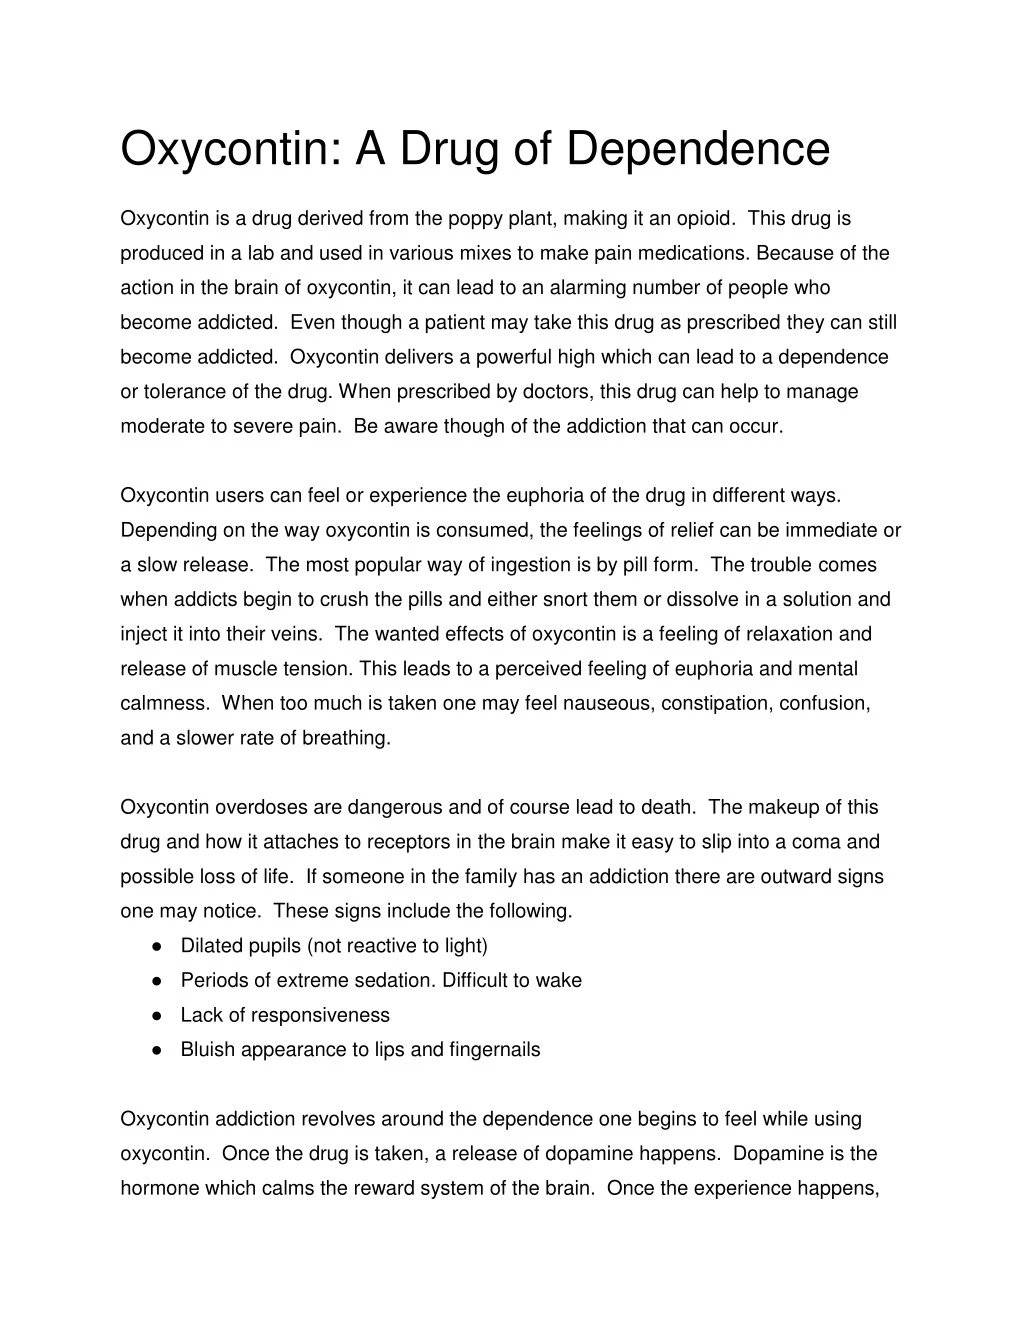 oxycontin a drug of dependence